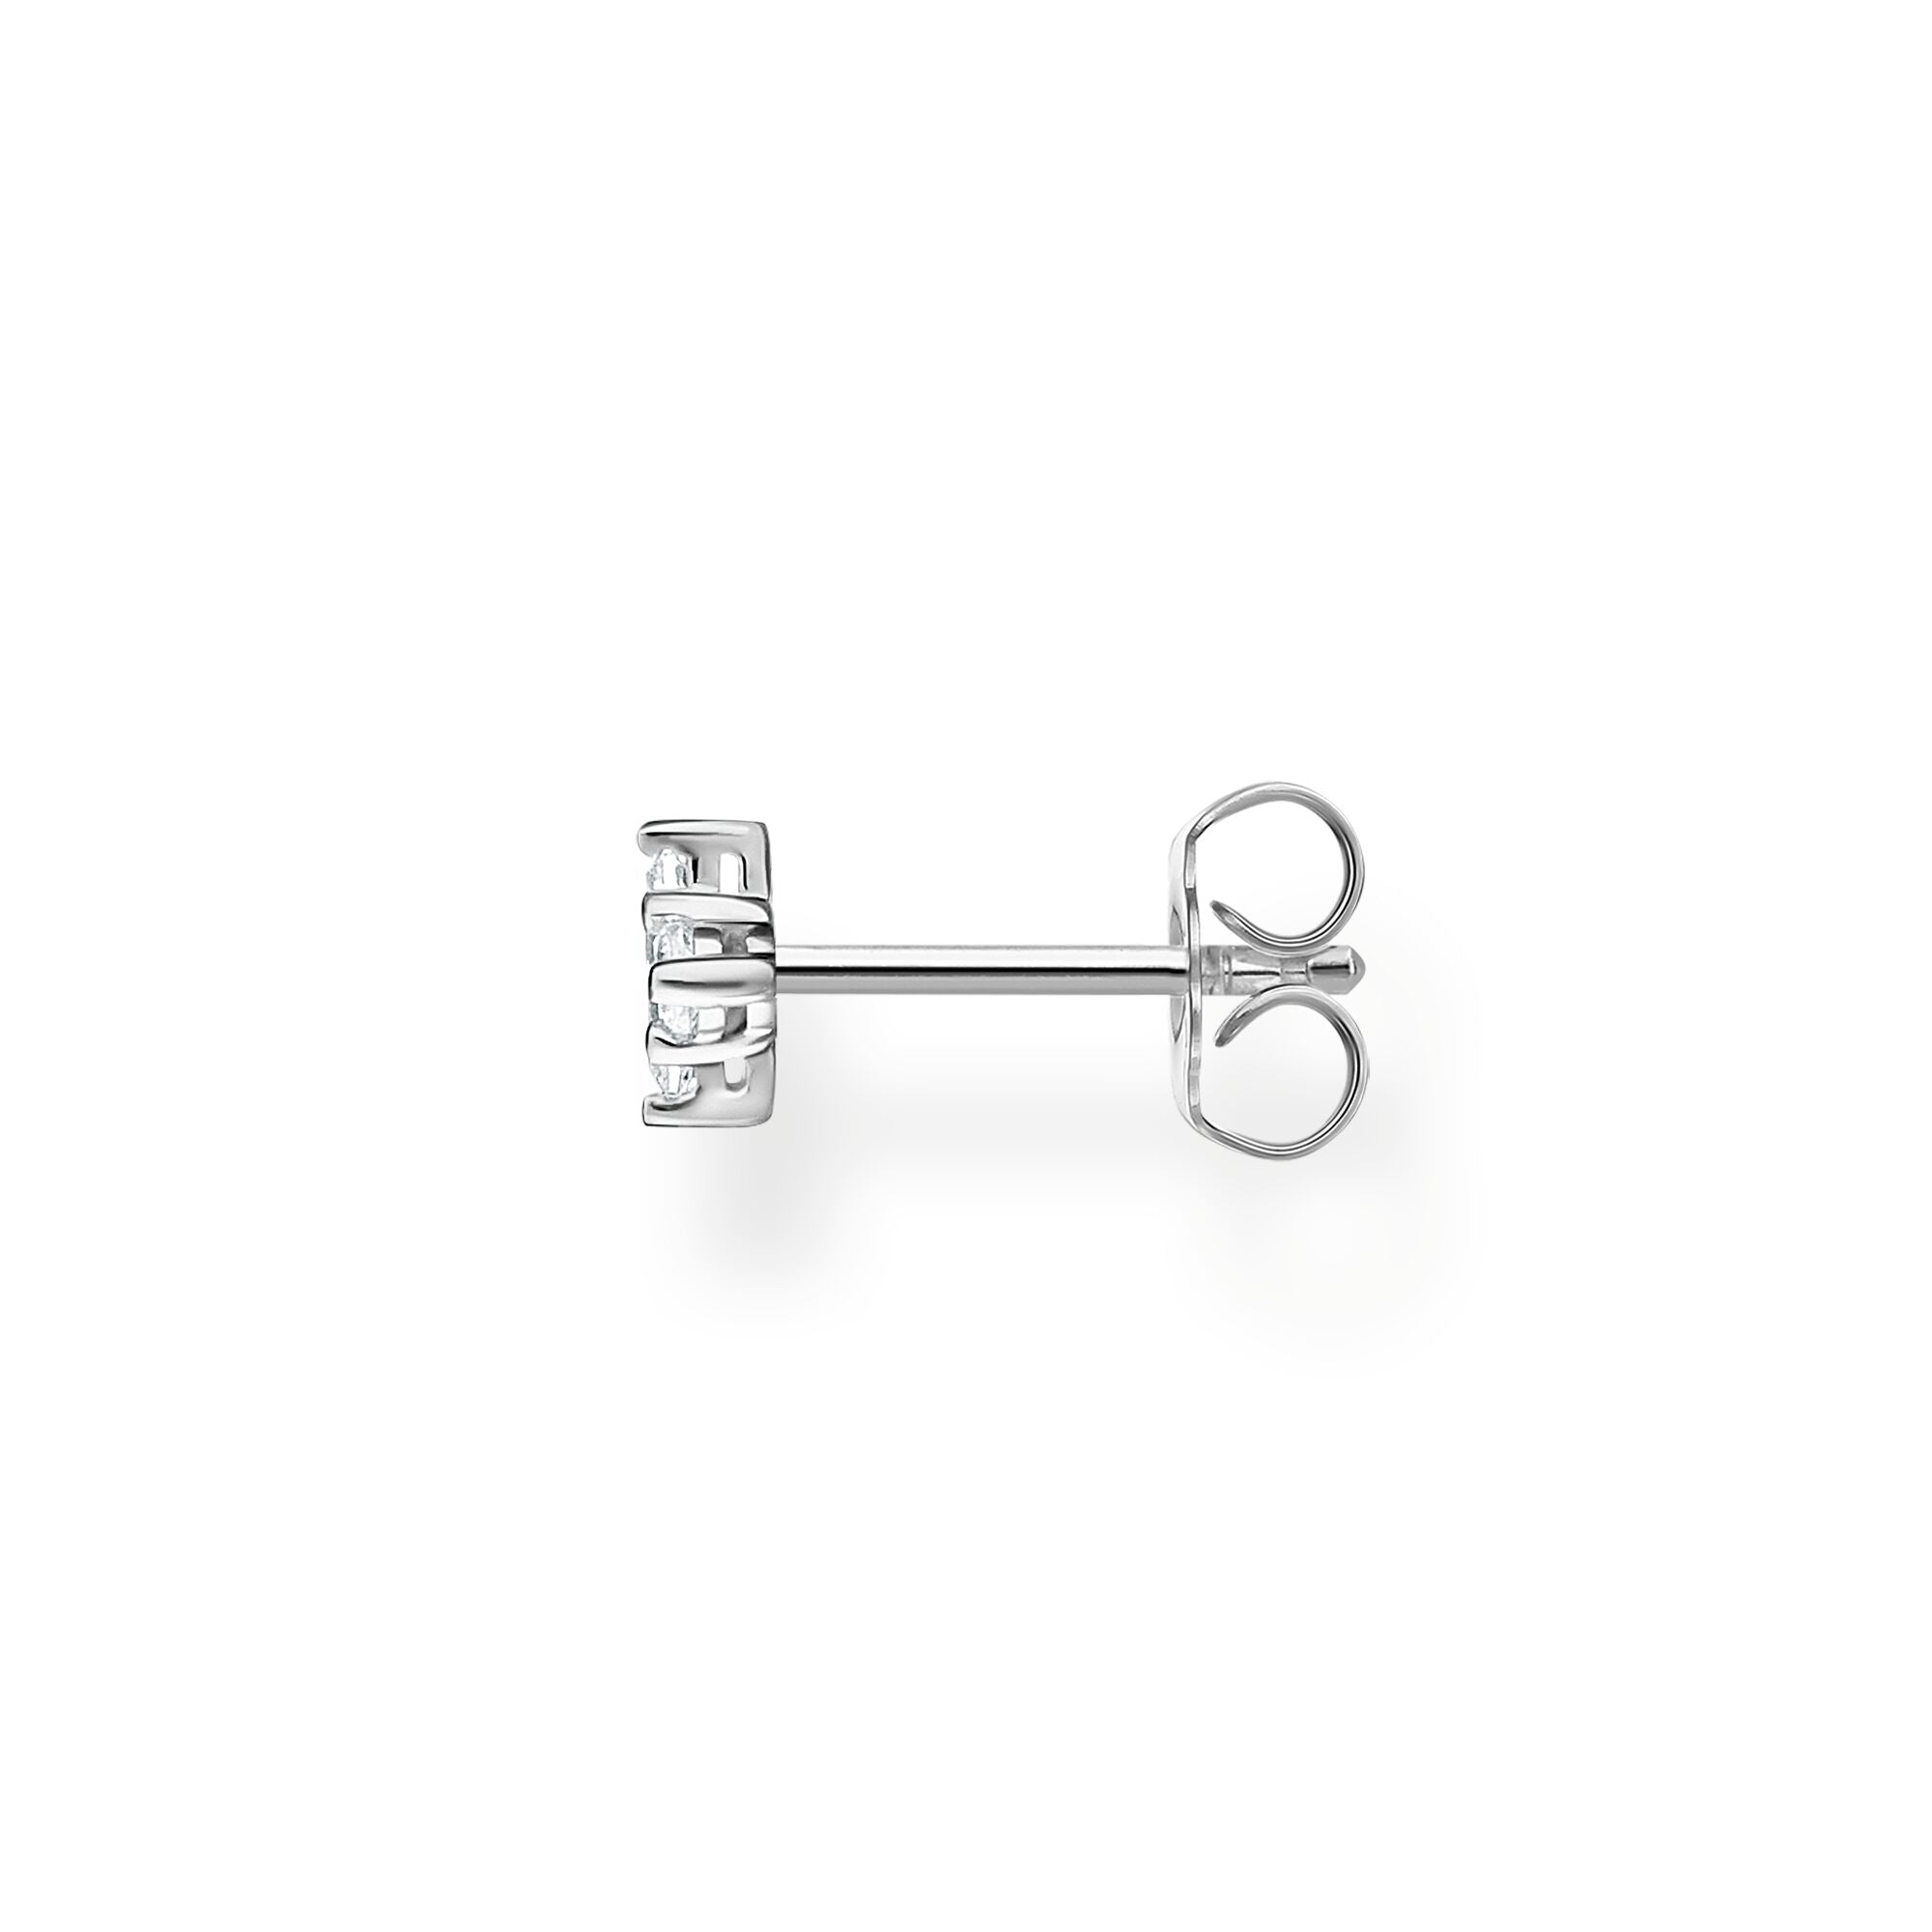 Thomas Sabo sterling silver and white baguette stone with round stone accent, single stud earring